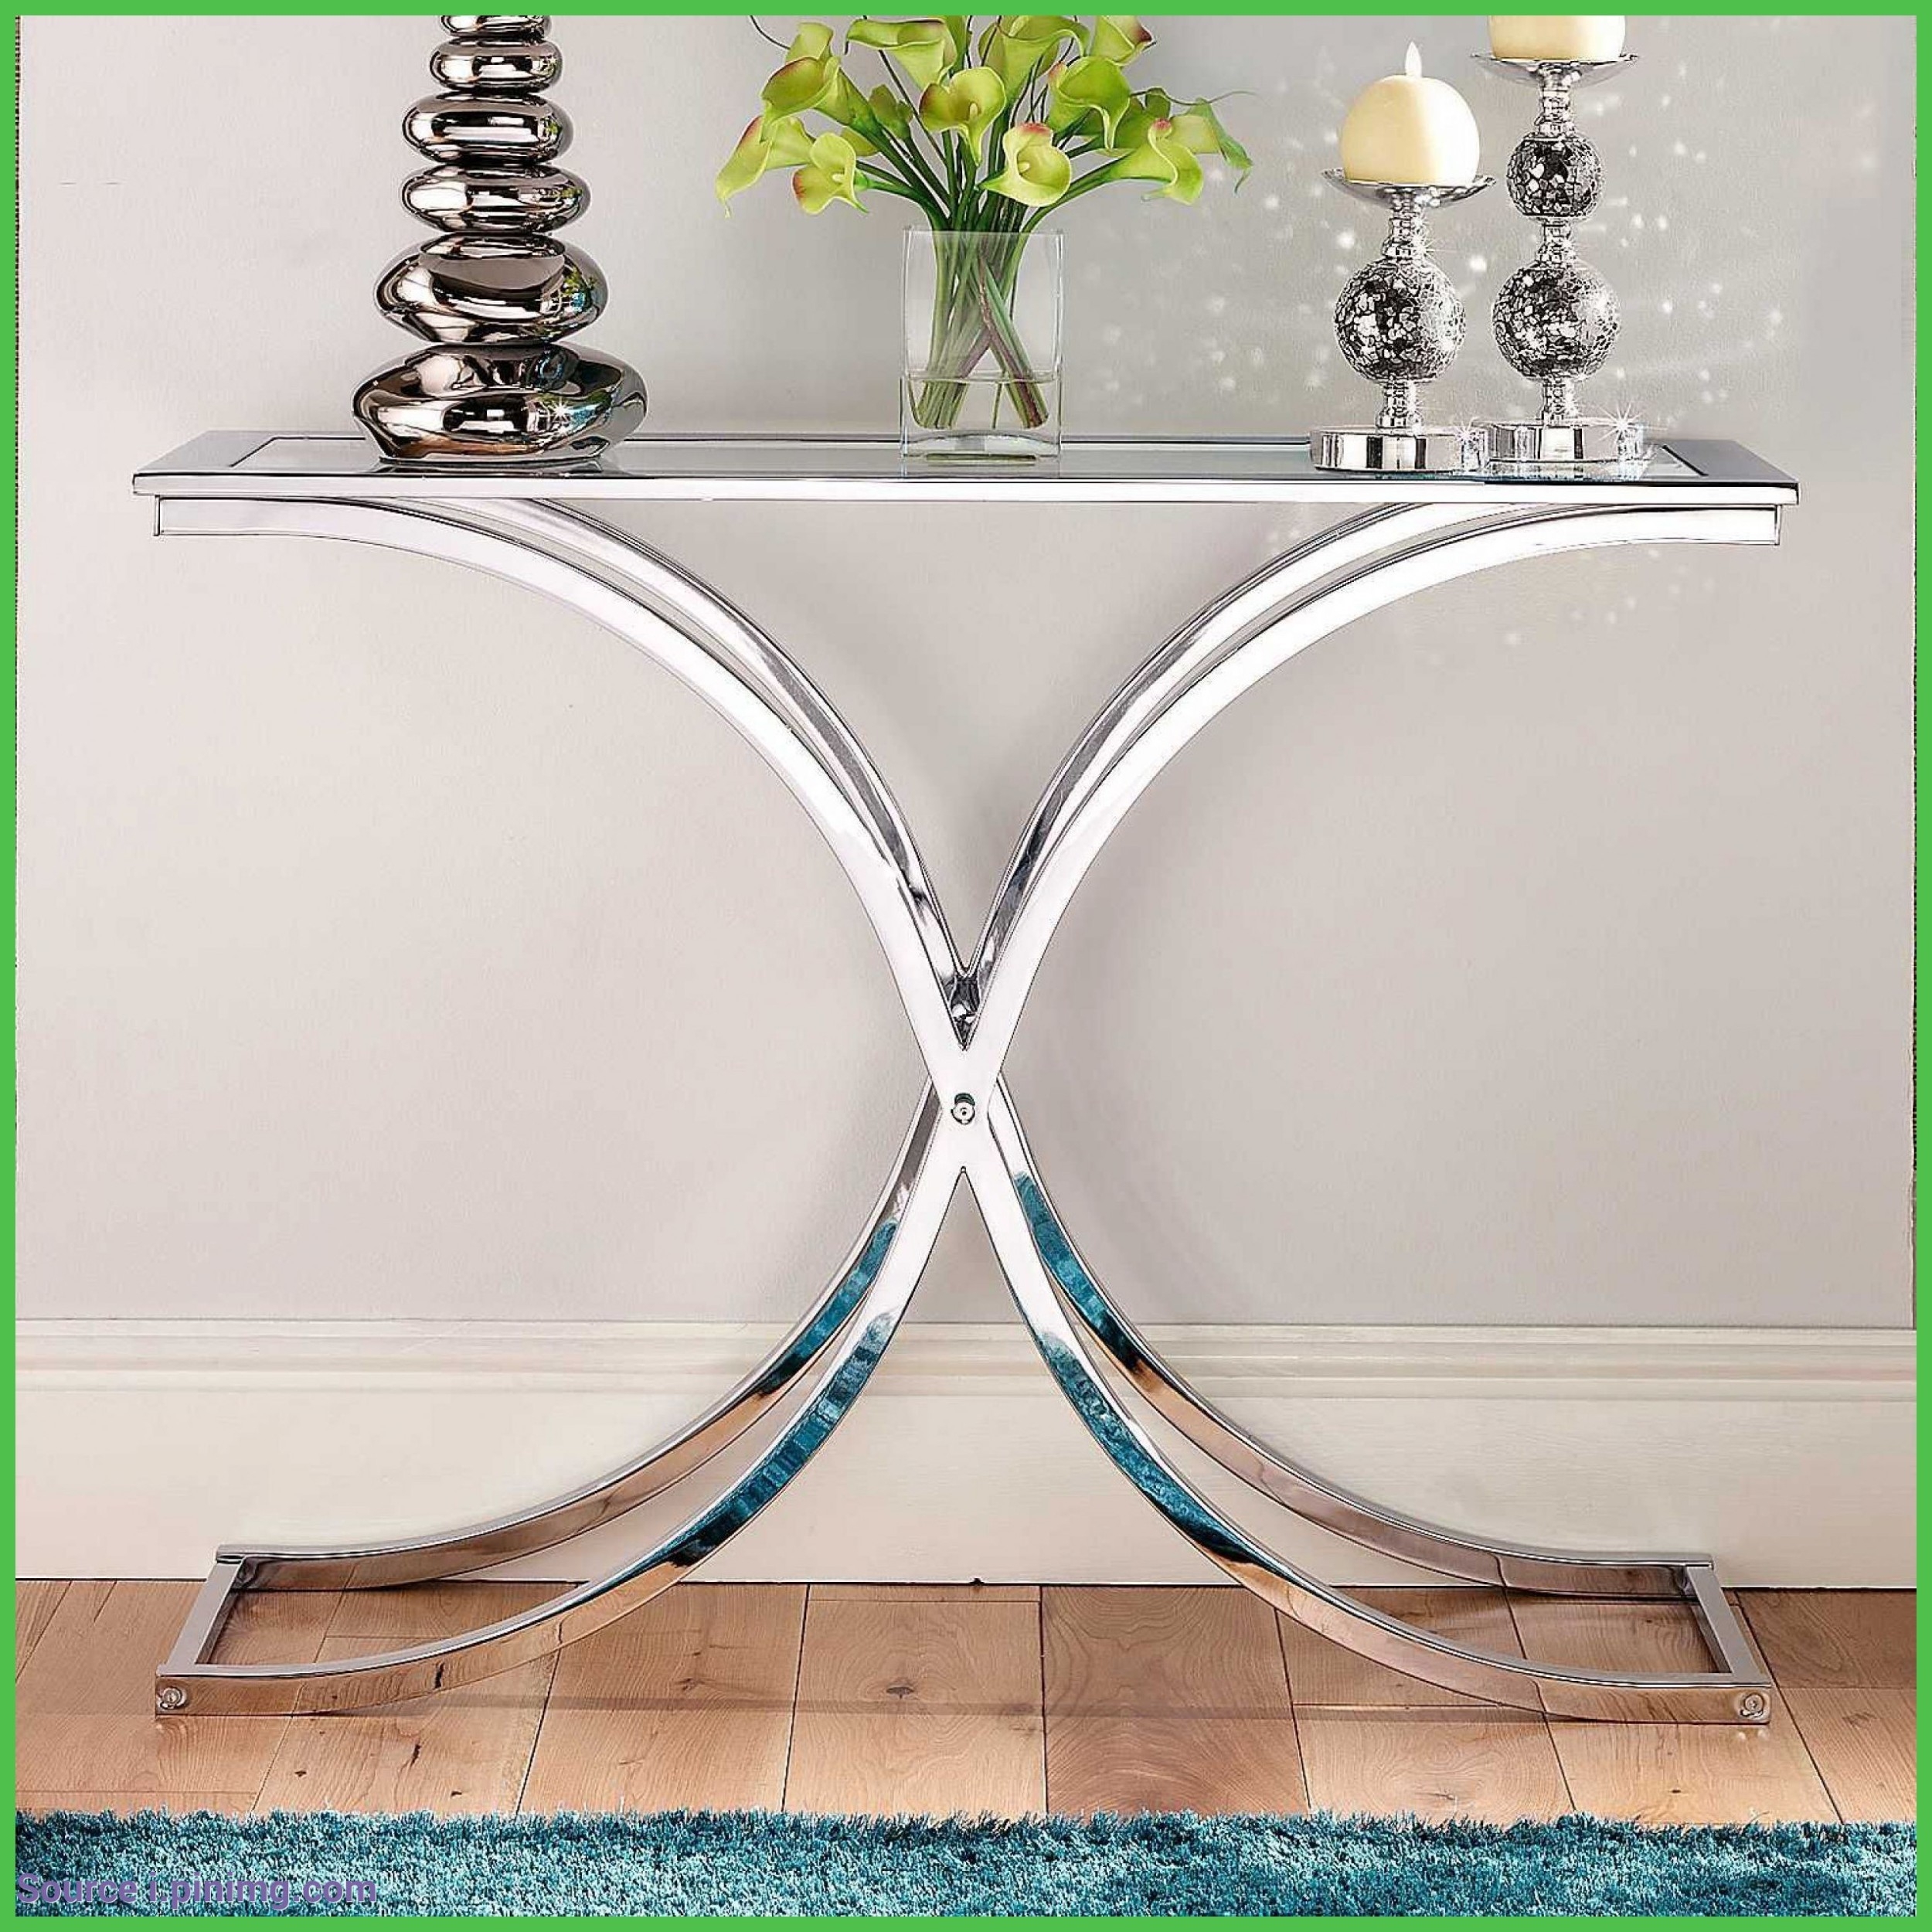 Engaging chrome and glass sofa table Glass And Chrome Console Table Ideas On Foter